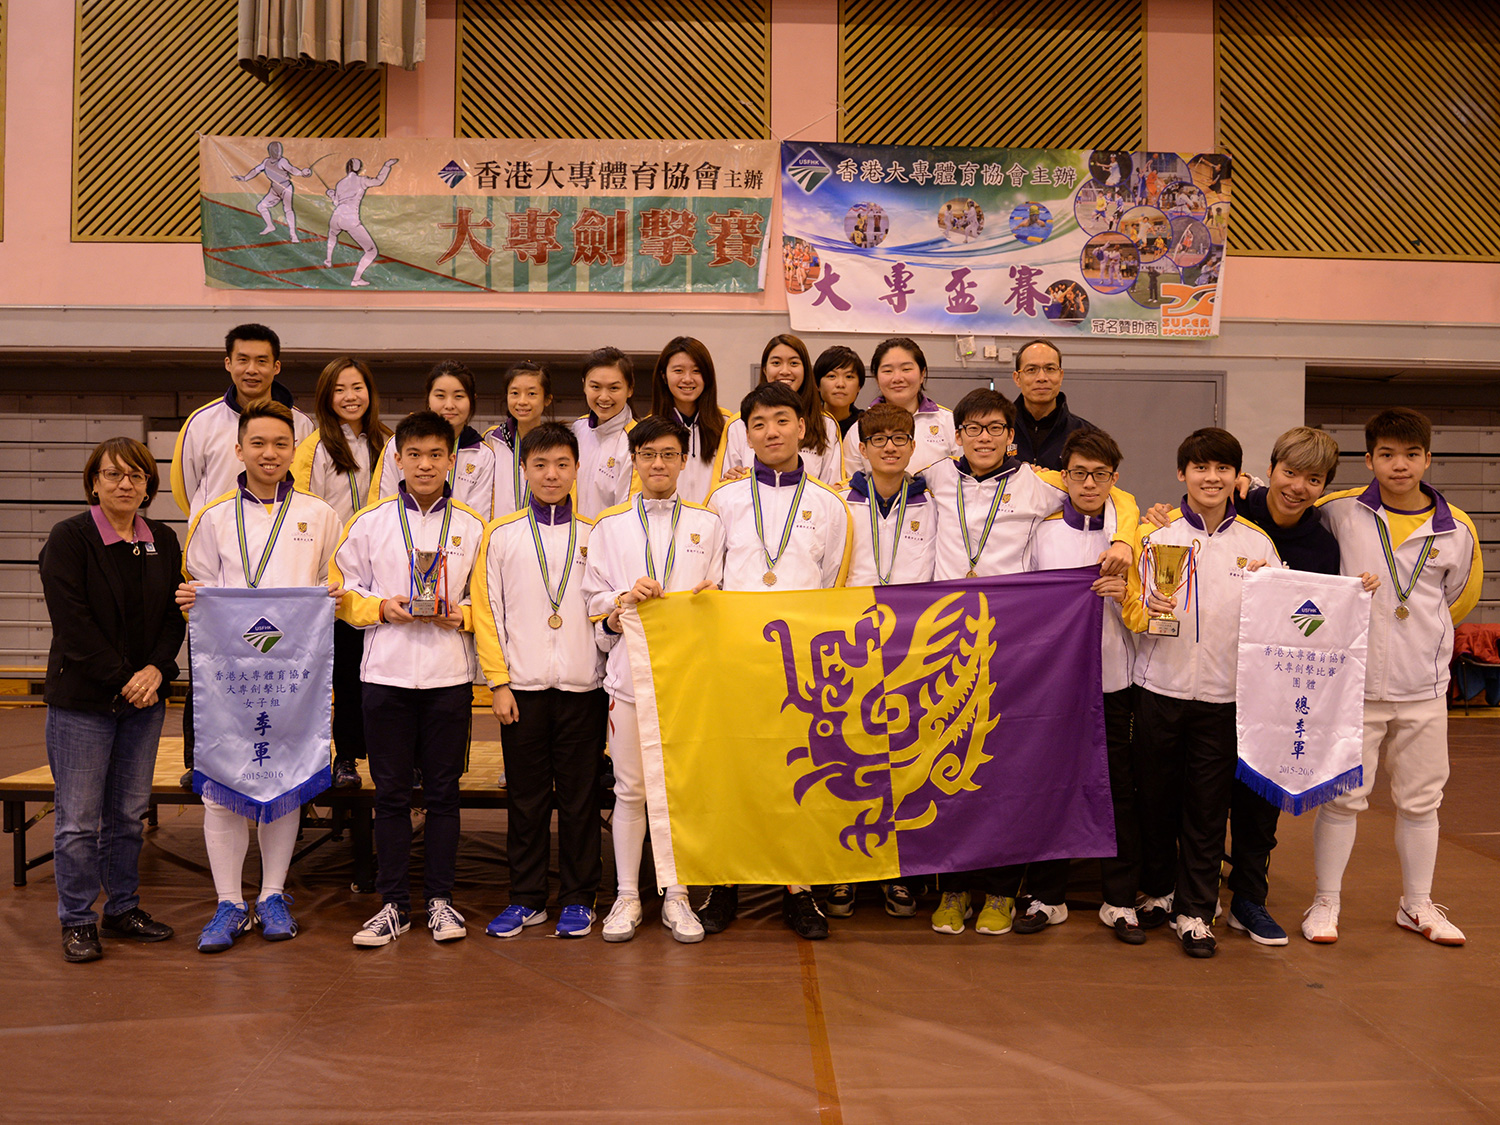 Team photos at USFHK Fencing Competition 2016